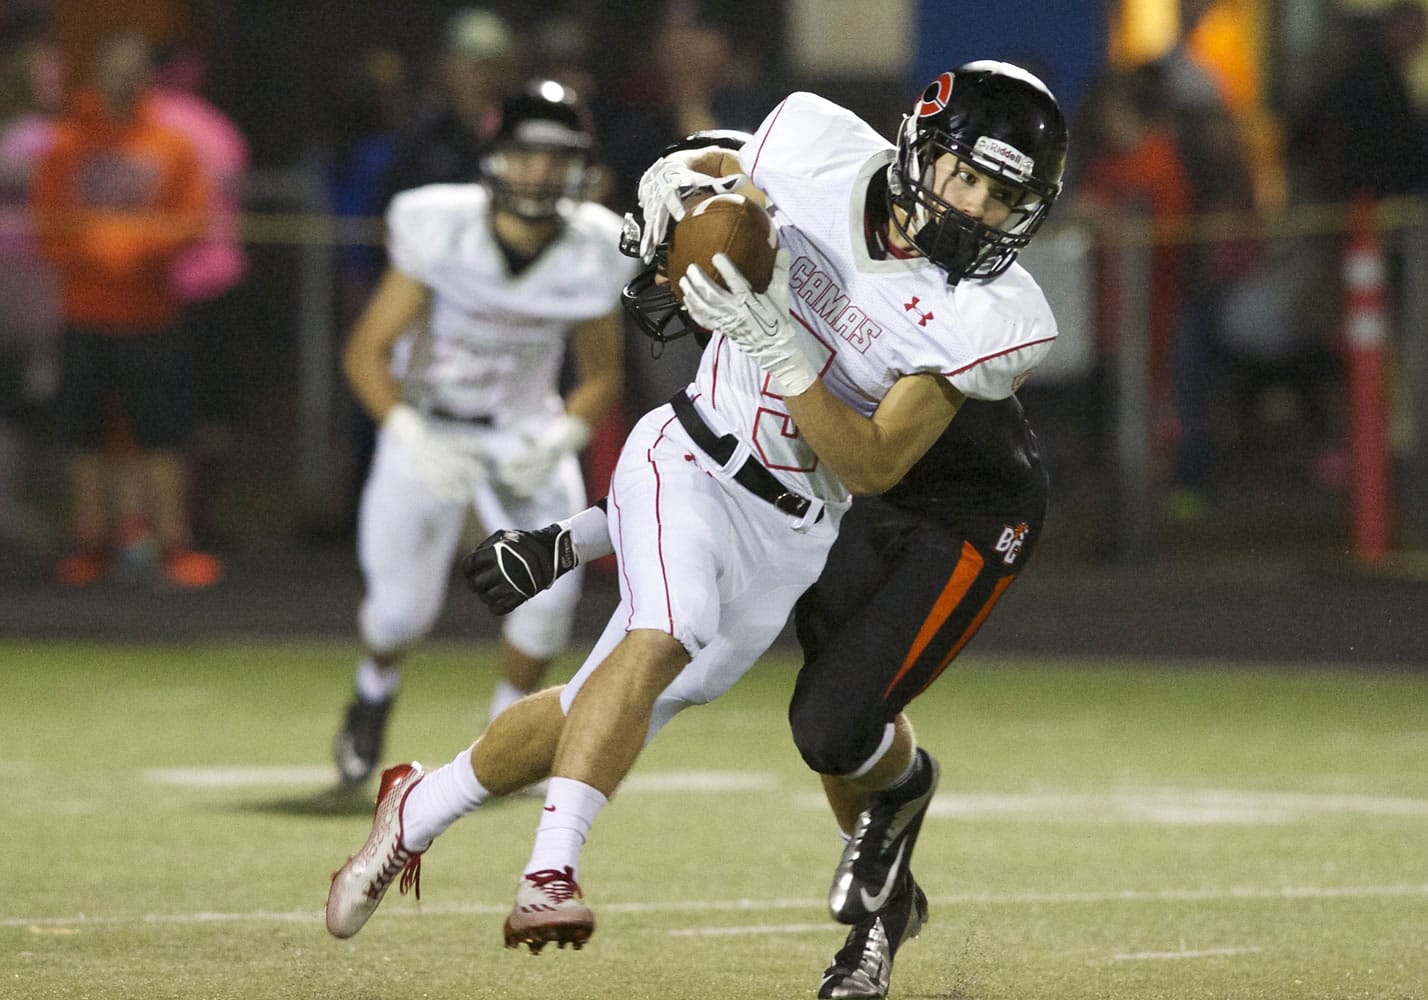 Camas' Jared Bentley carries the ball for a big gain against Battle Ground, Thursday, October 9, 2014.